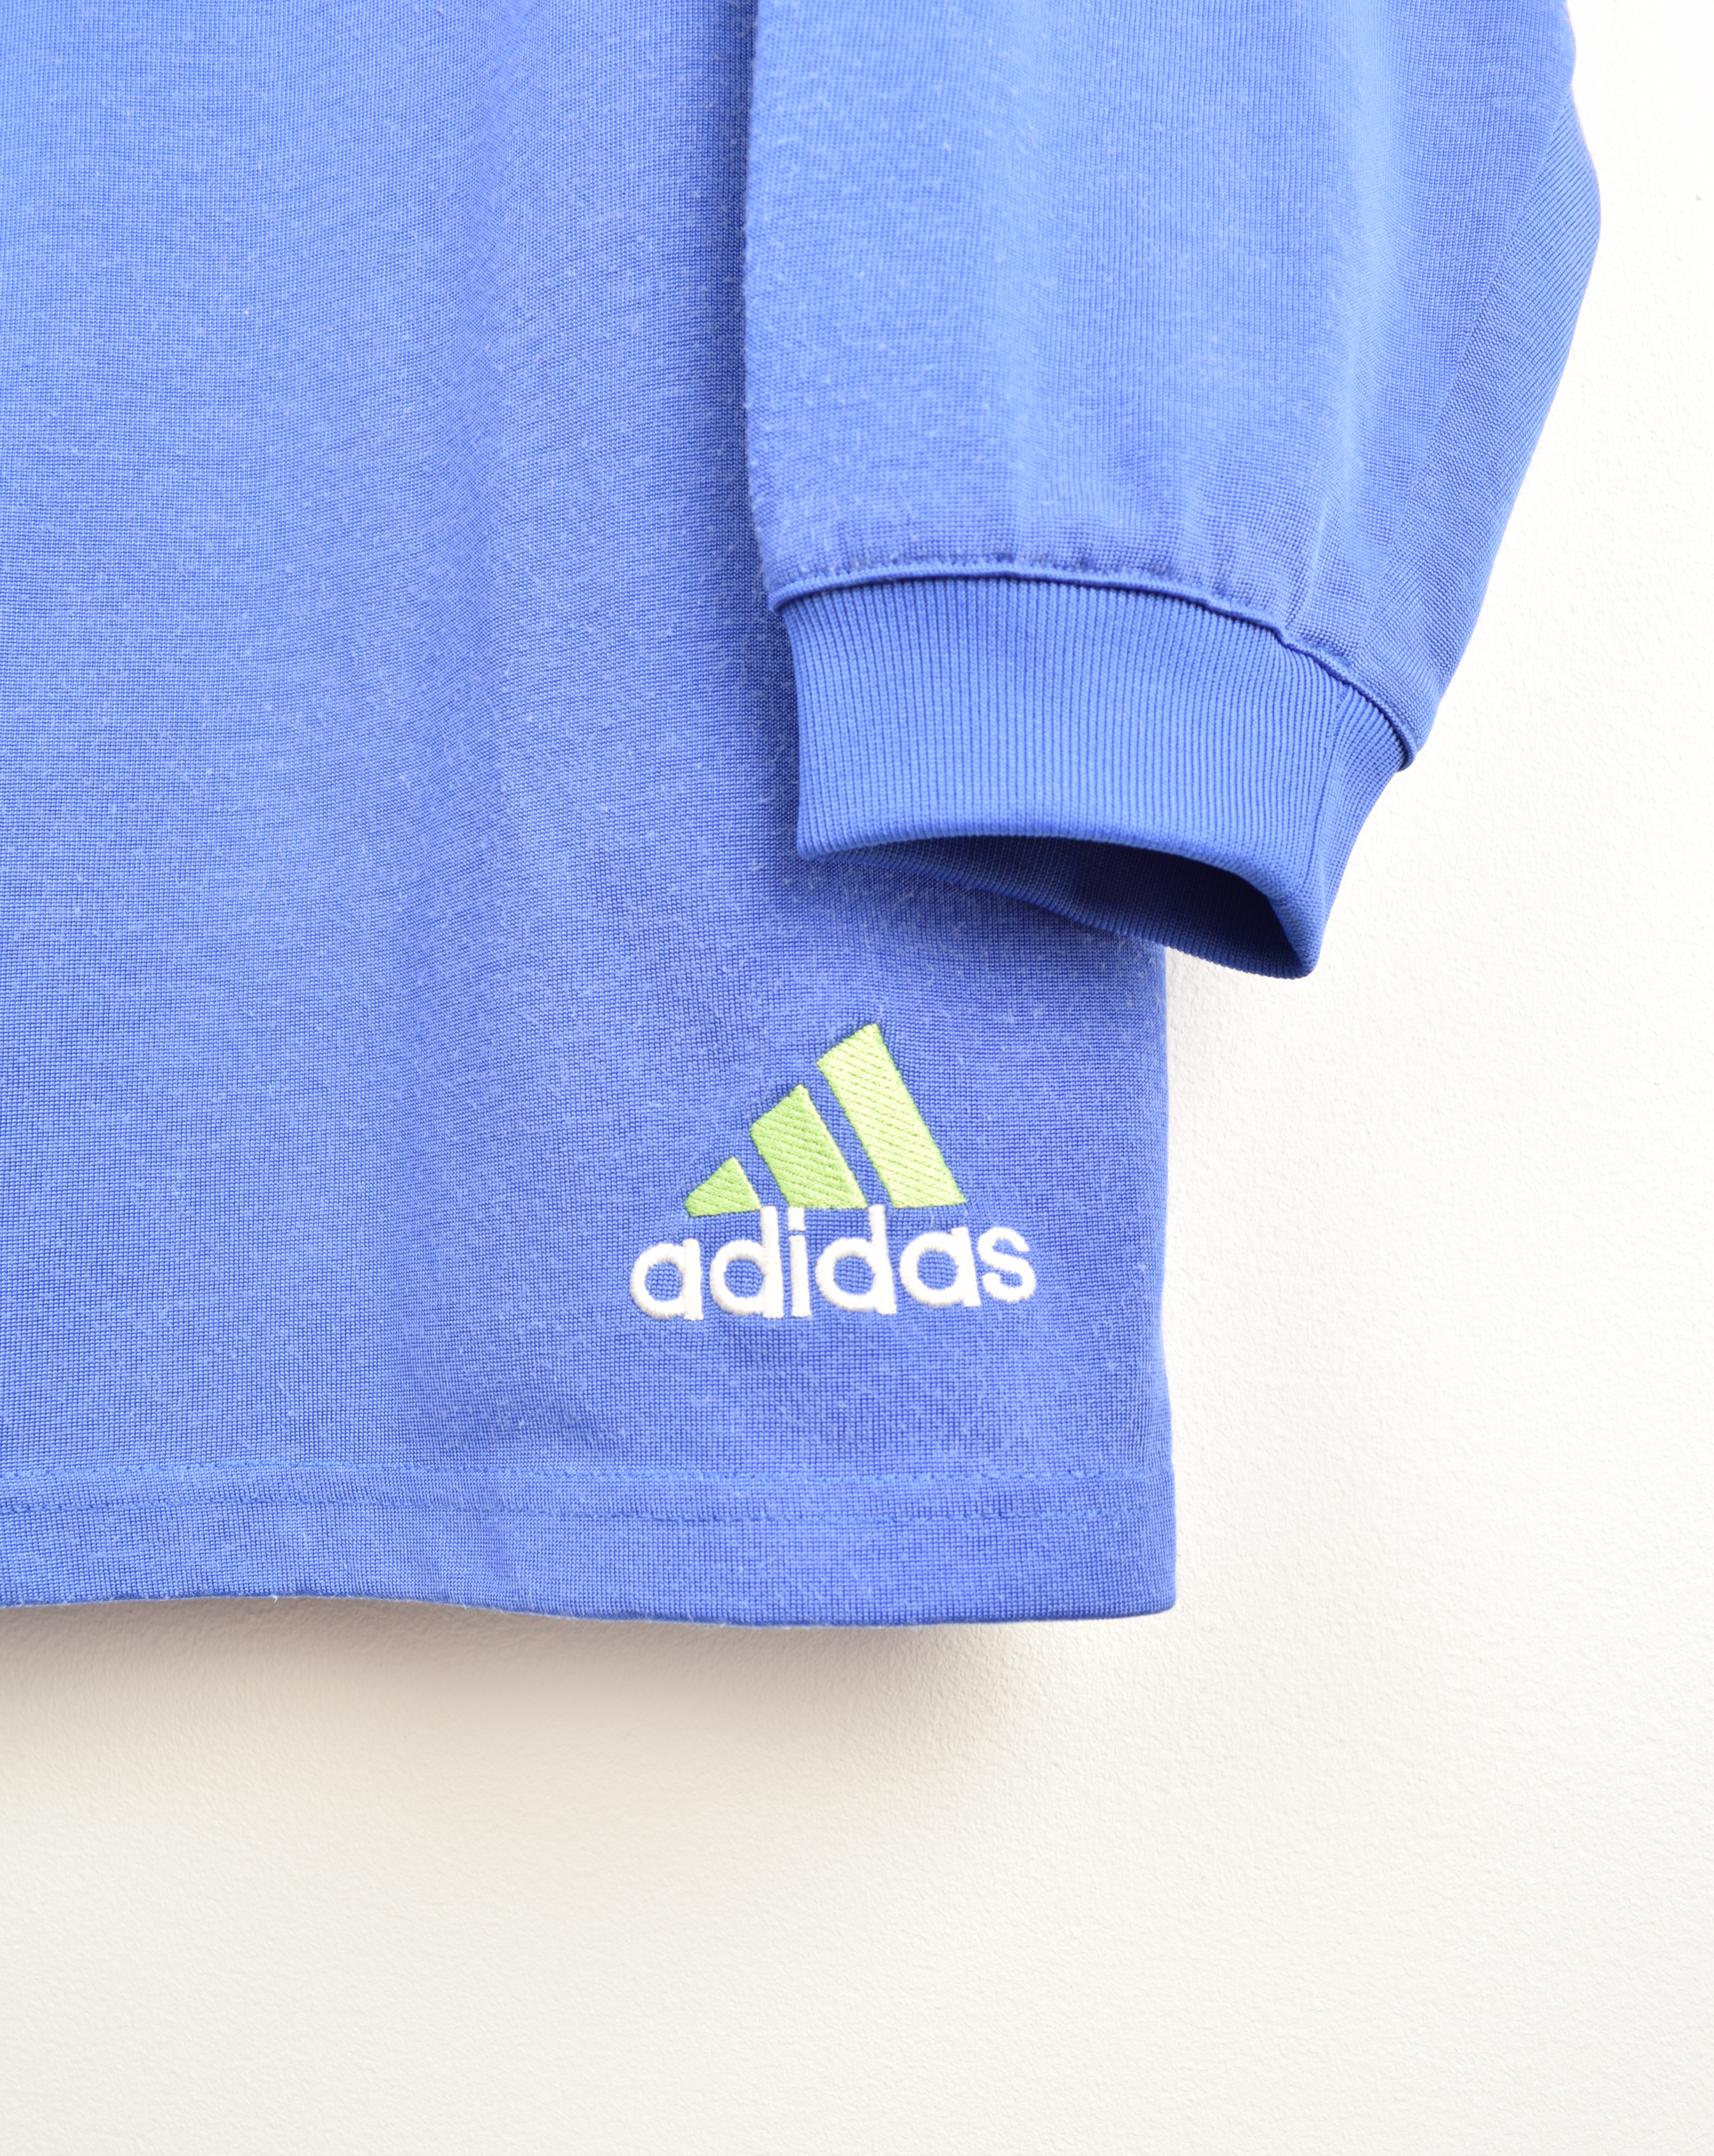 Rare Adidas Vintage T-shirt (M) FROM THE BLOCK VINTAGE